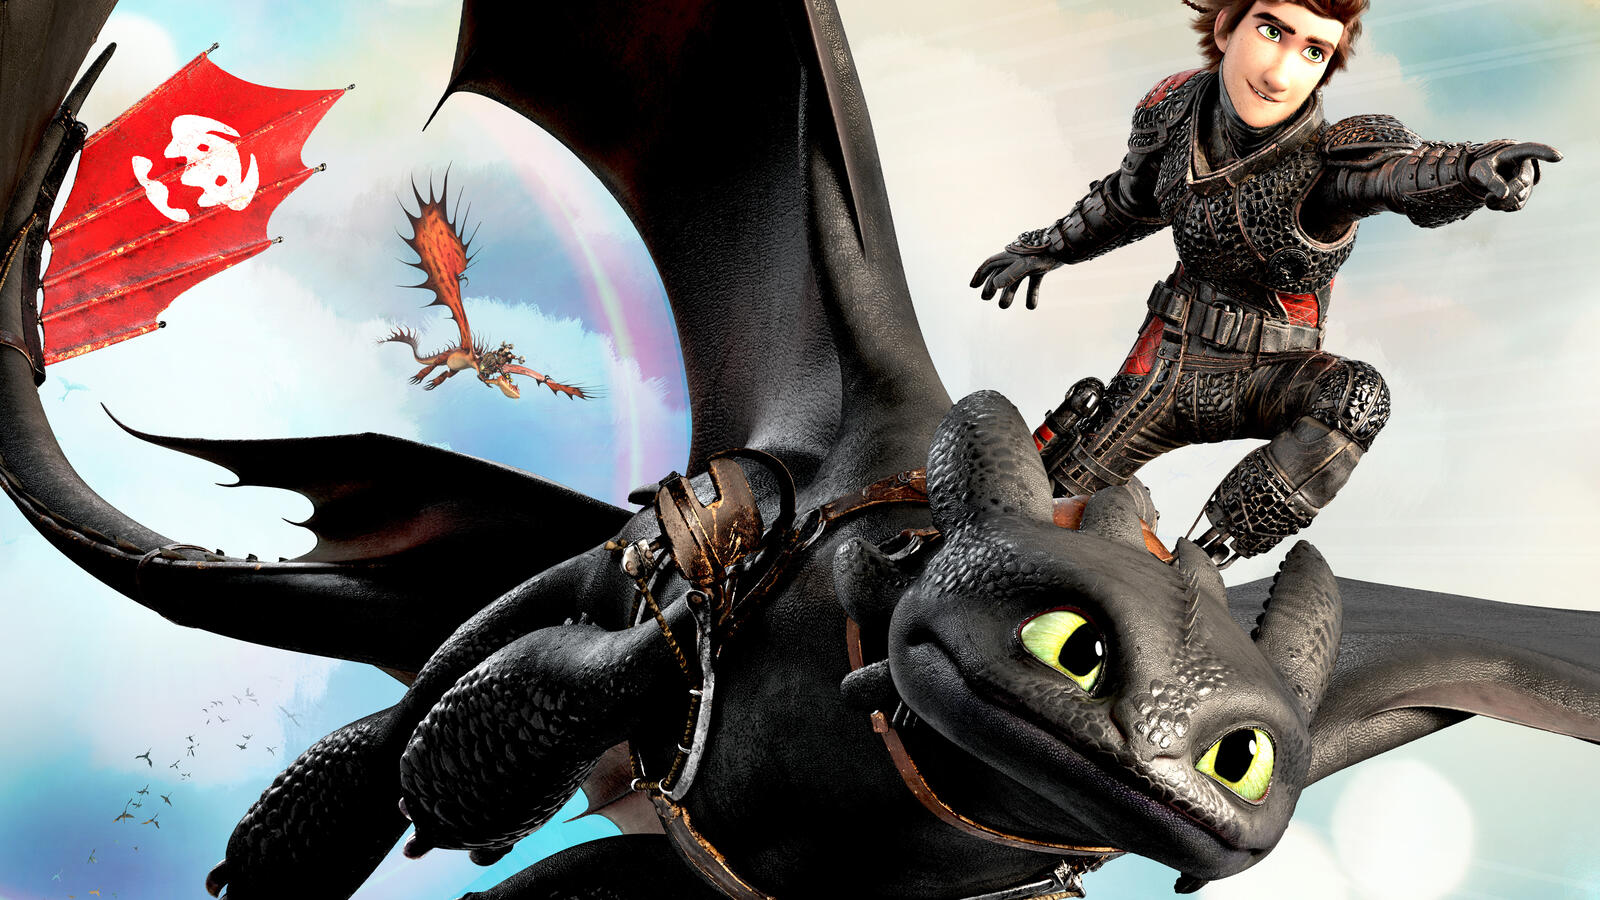 Wallpapers How To Train Your Dragon The Hidden World animated movies How To Train Your Dragon 3 on the desktop